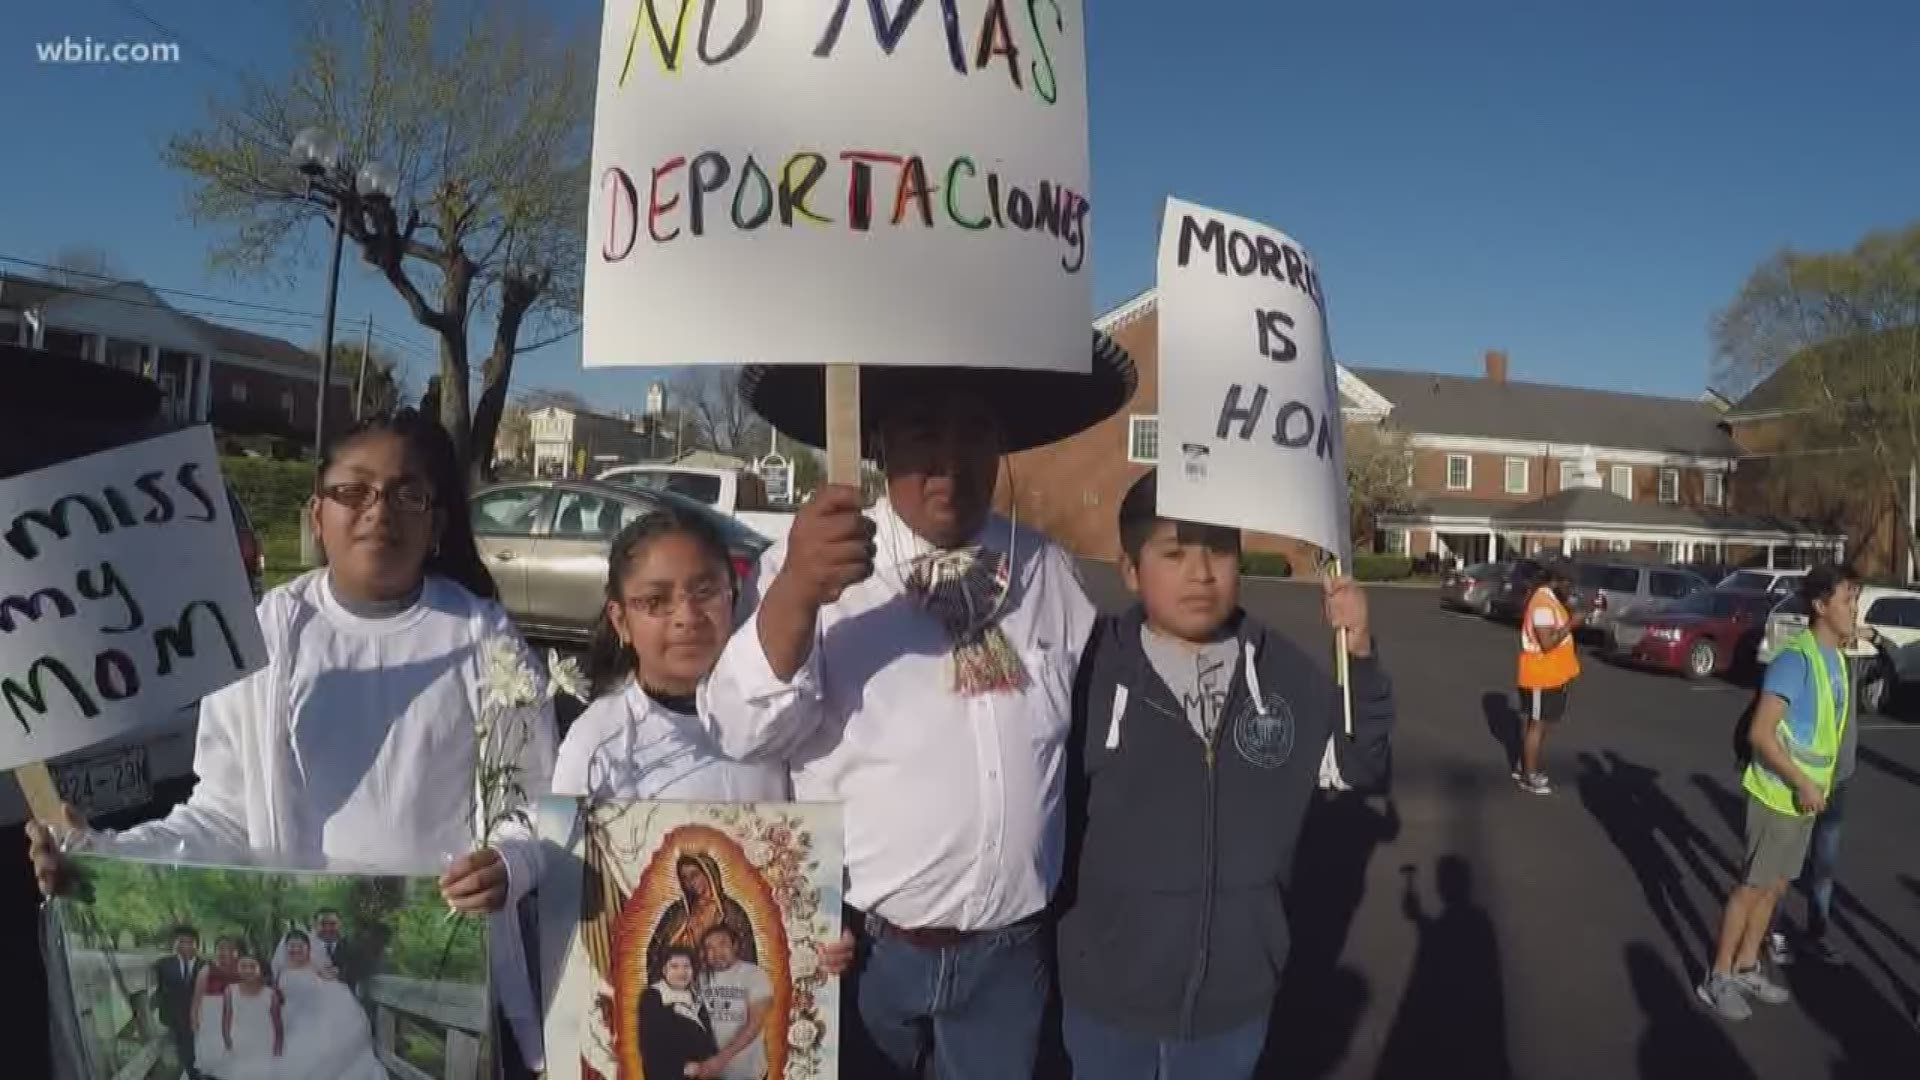 April 12, 2018: The Morristown community held a march in support of undocumented immigrants who were swept up in a federal raid.